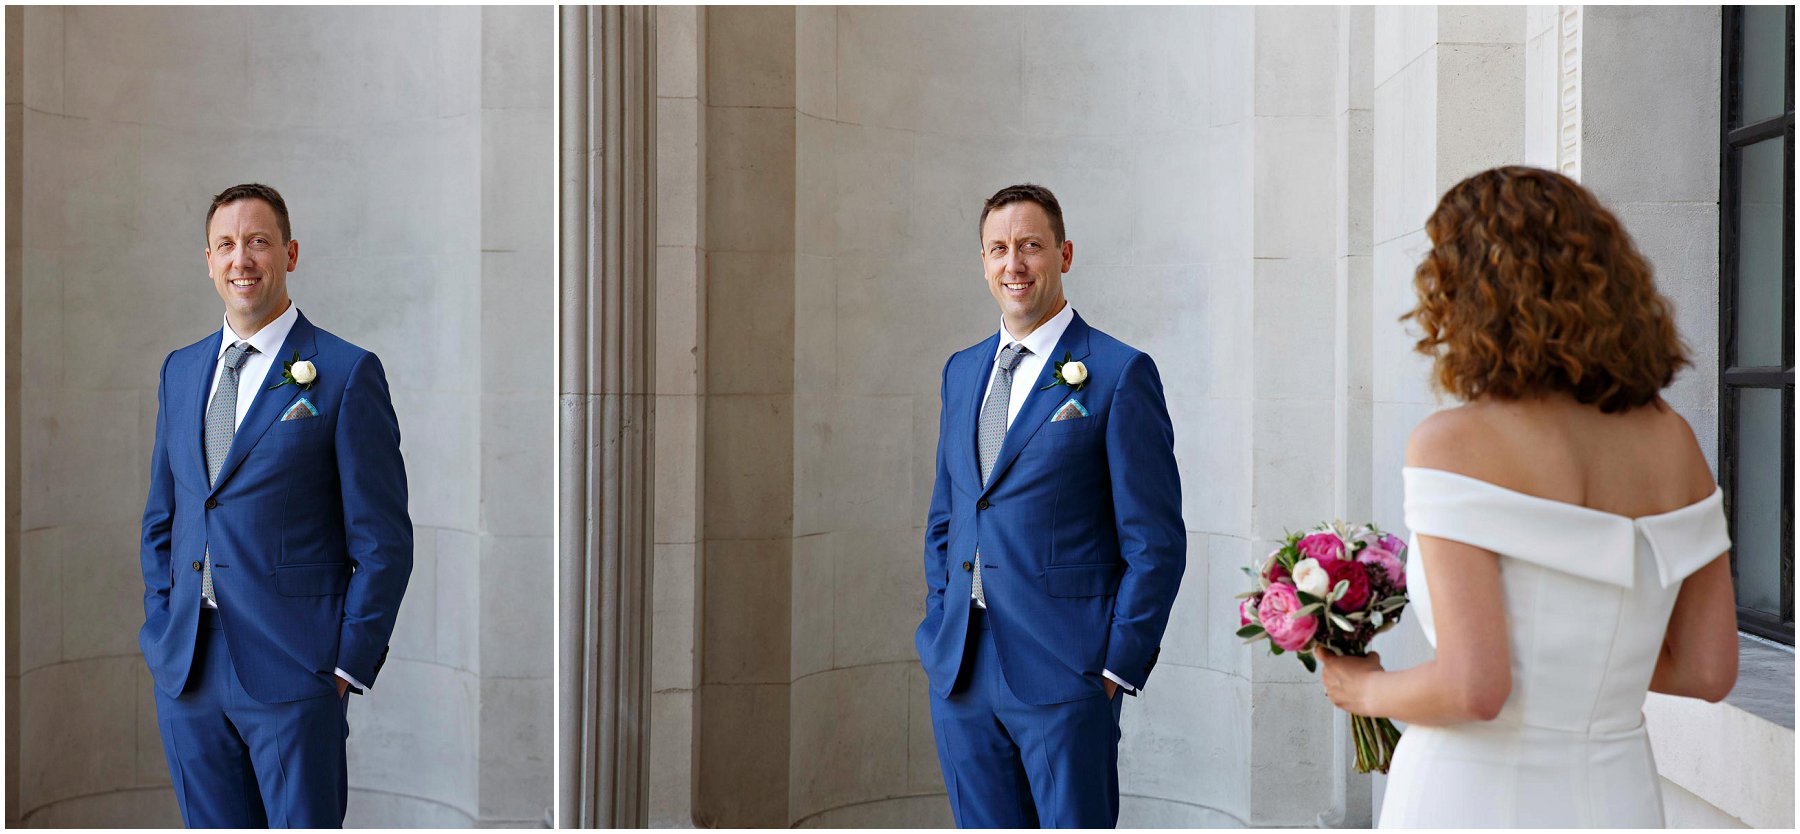 Timeless and elegant groom portrait at The Old Marylebone Town Hall by YBPHOTOGRAPHIC